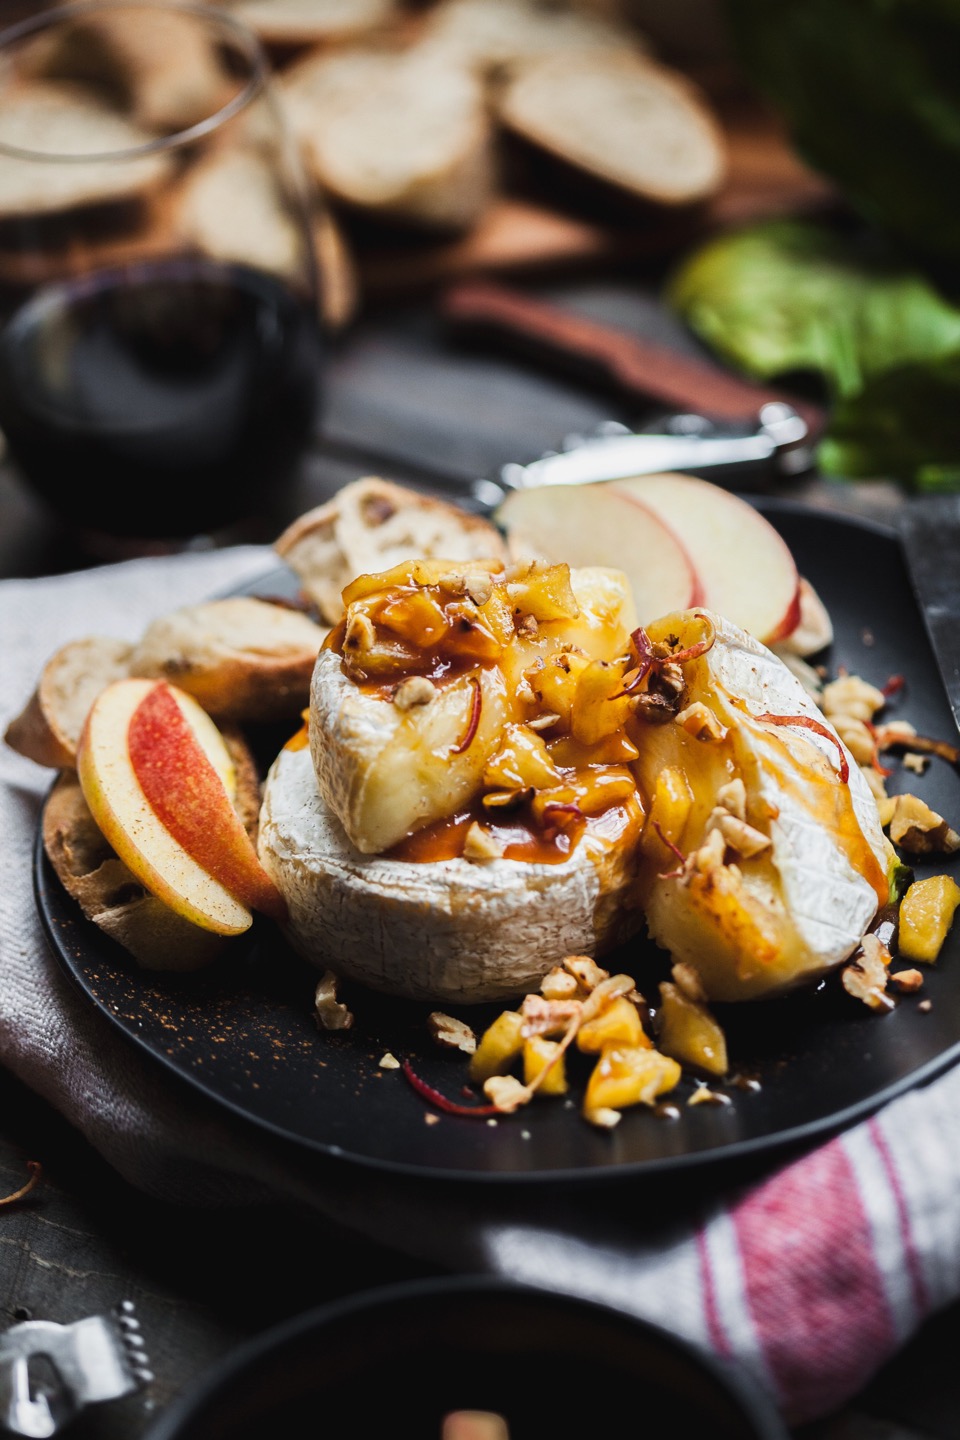 Baked Brie With Caramelized Apples